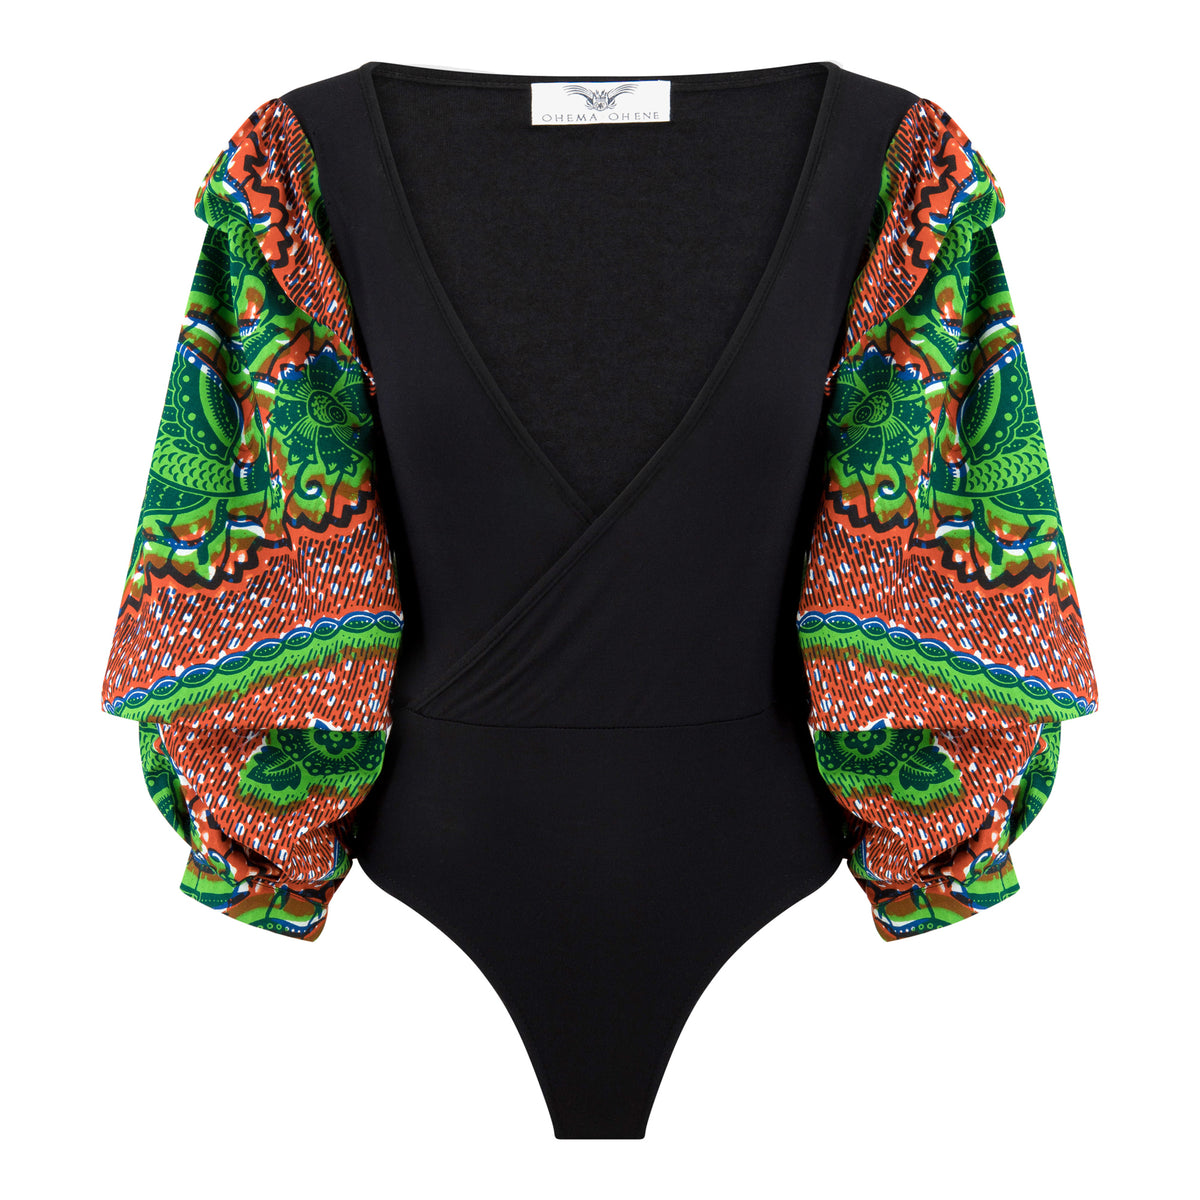 Naa African print bodysuit- Exaggerated puff sleeves - OHEMA OHENE AFRICAN INSPIRED FASHION